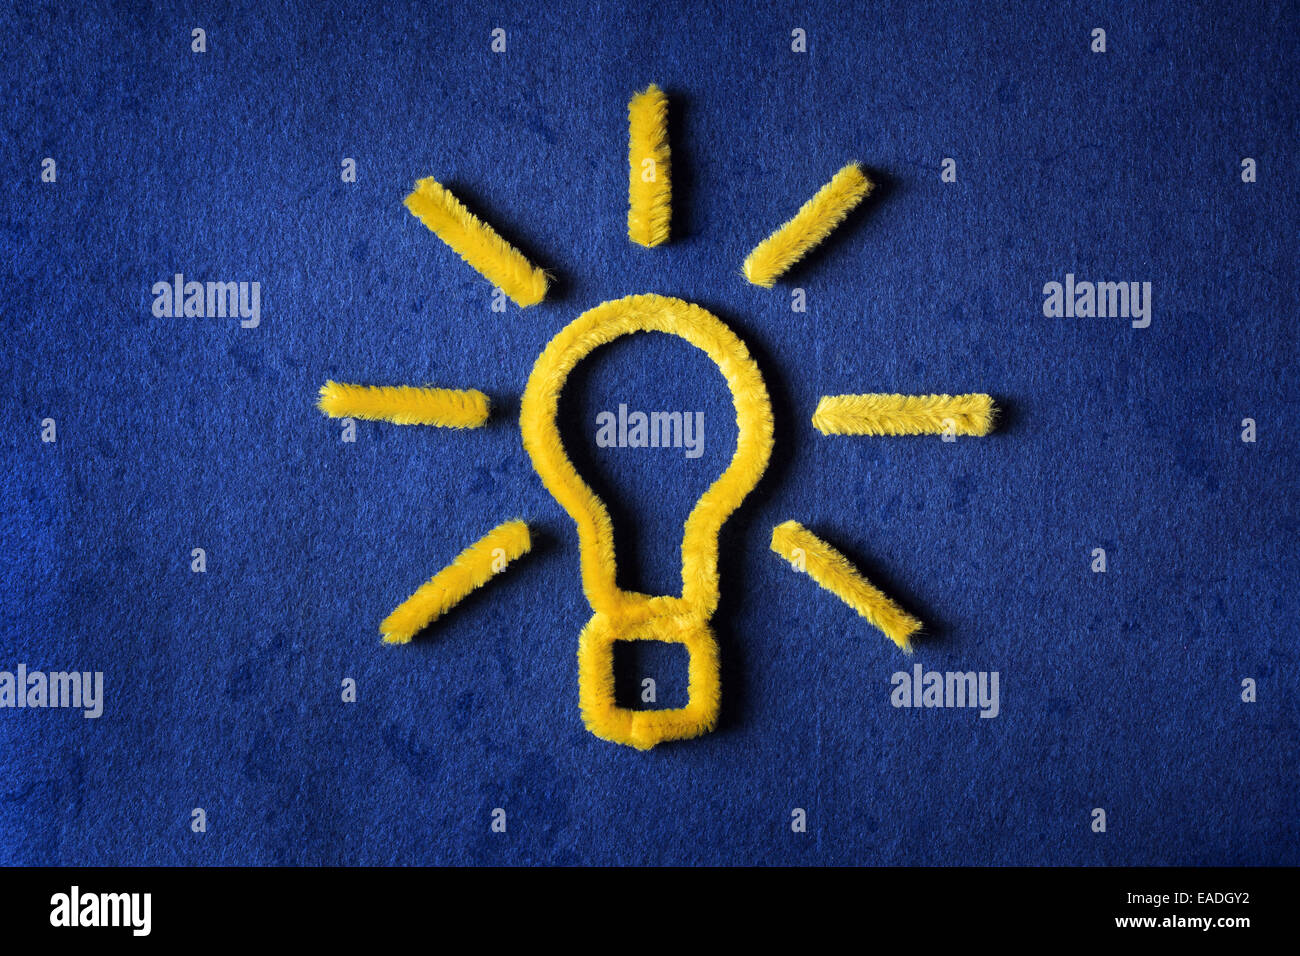 Inspiration concept yellow pipe cleaner light bulb metaphor for good idea Stock Photo